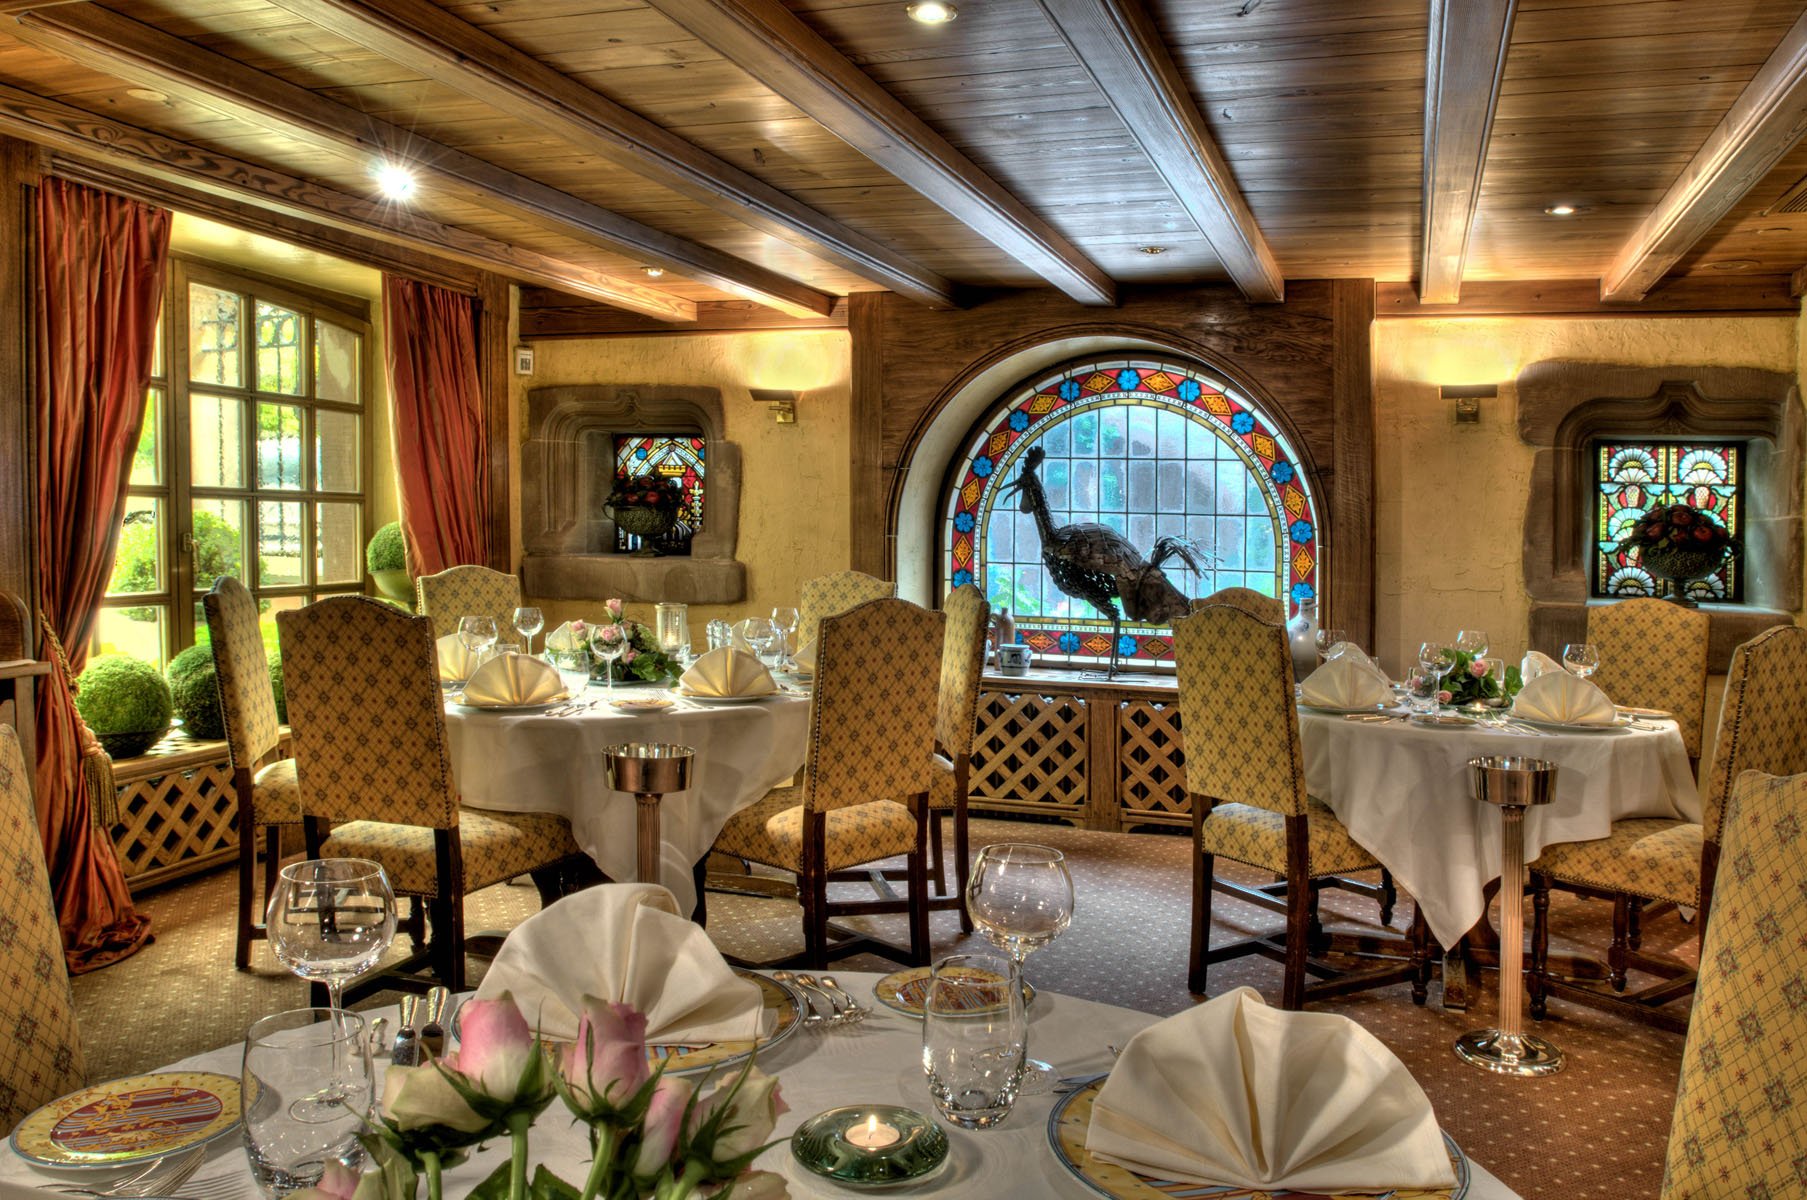 Hotel restaurant with SPA in the Alsace region